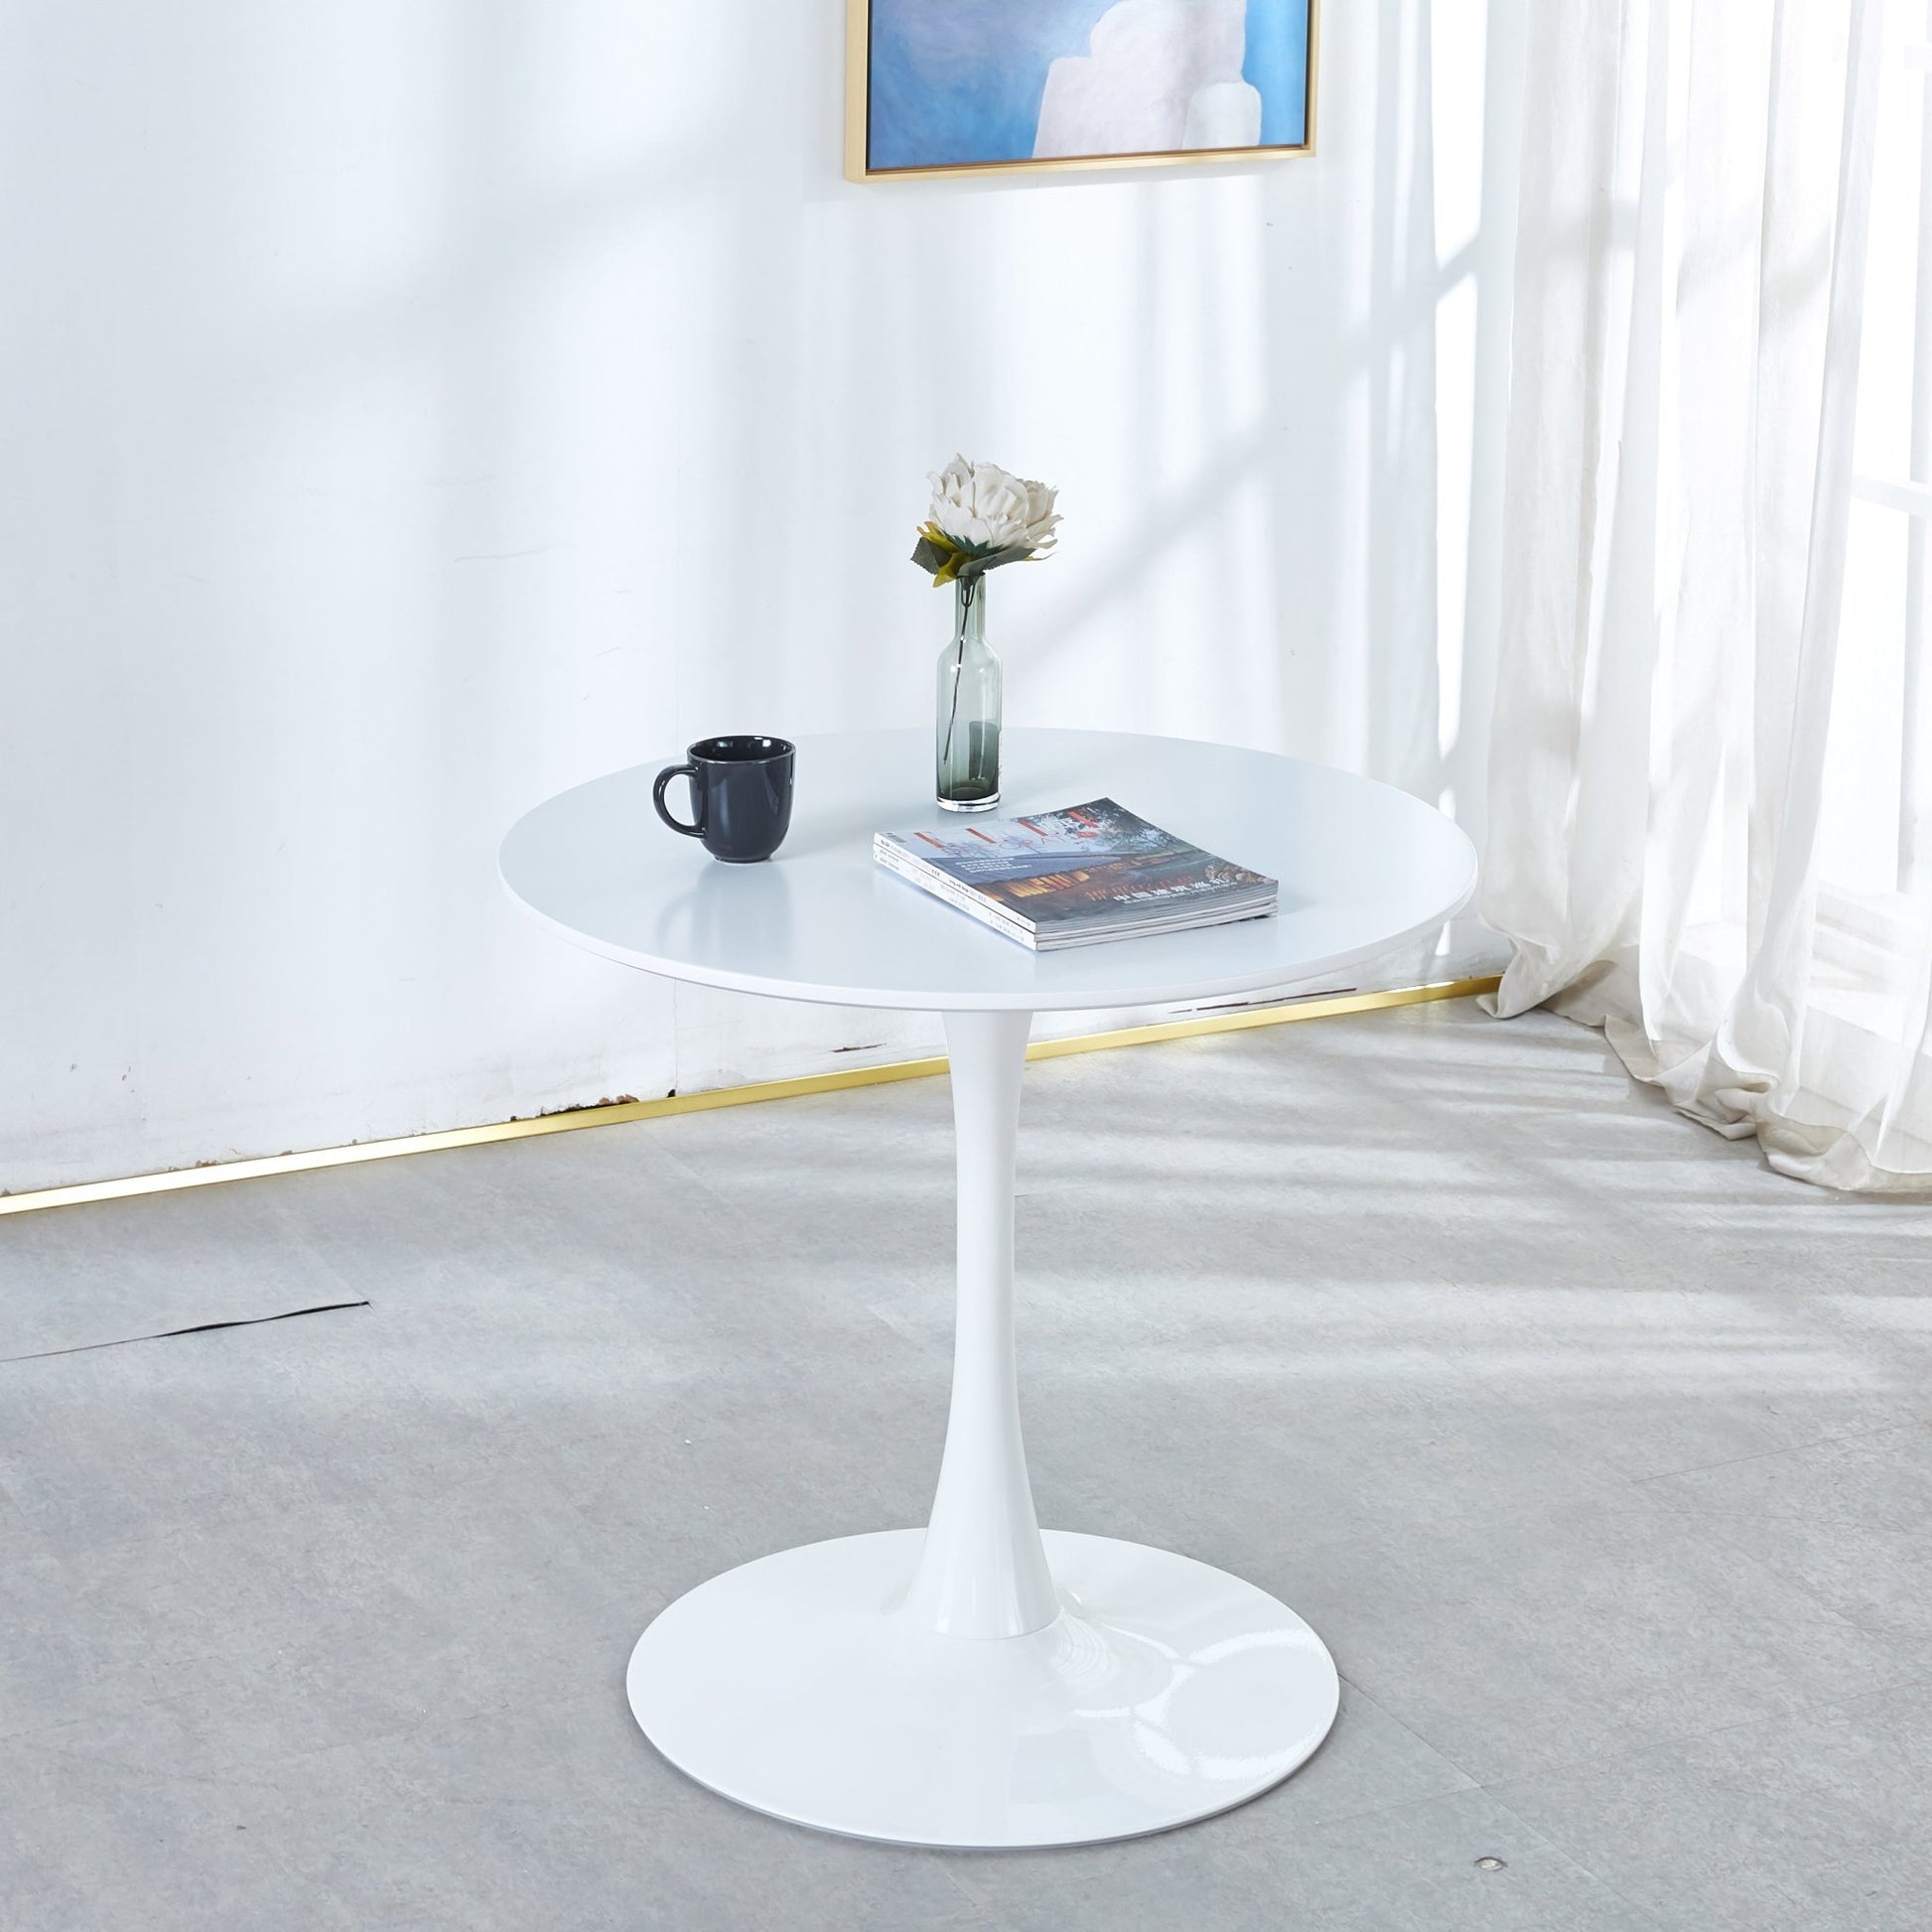 31.5"White Tulip Table Mid-century Dining Table for 2-4 people With Round Mdf Table Top, Pedestal Dining Table, End Table Leisure Coffee Table - Groovy Boardz